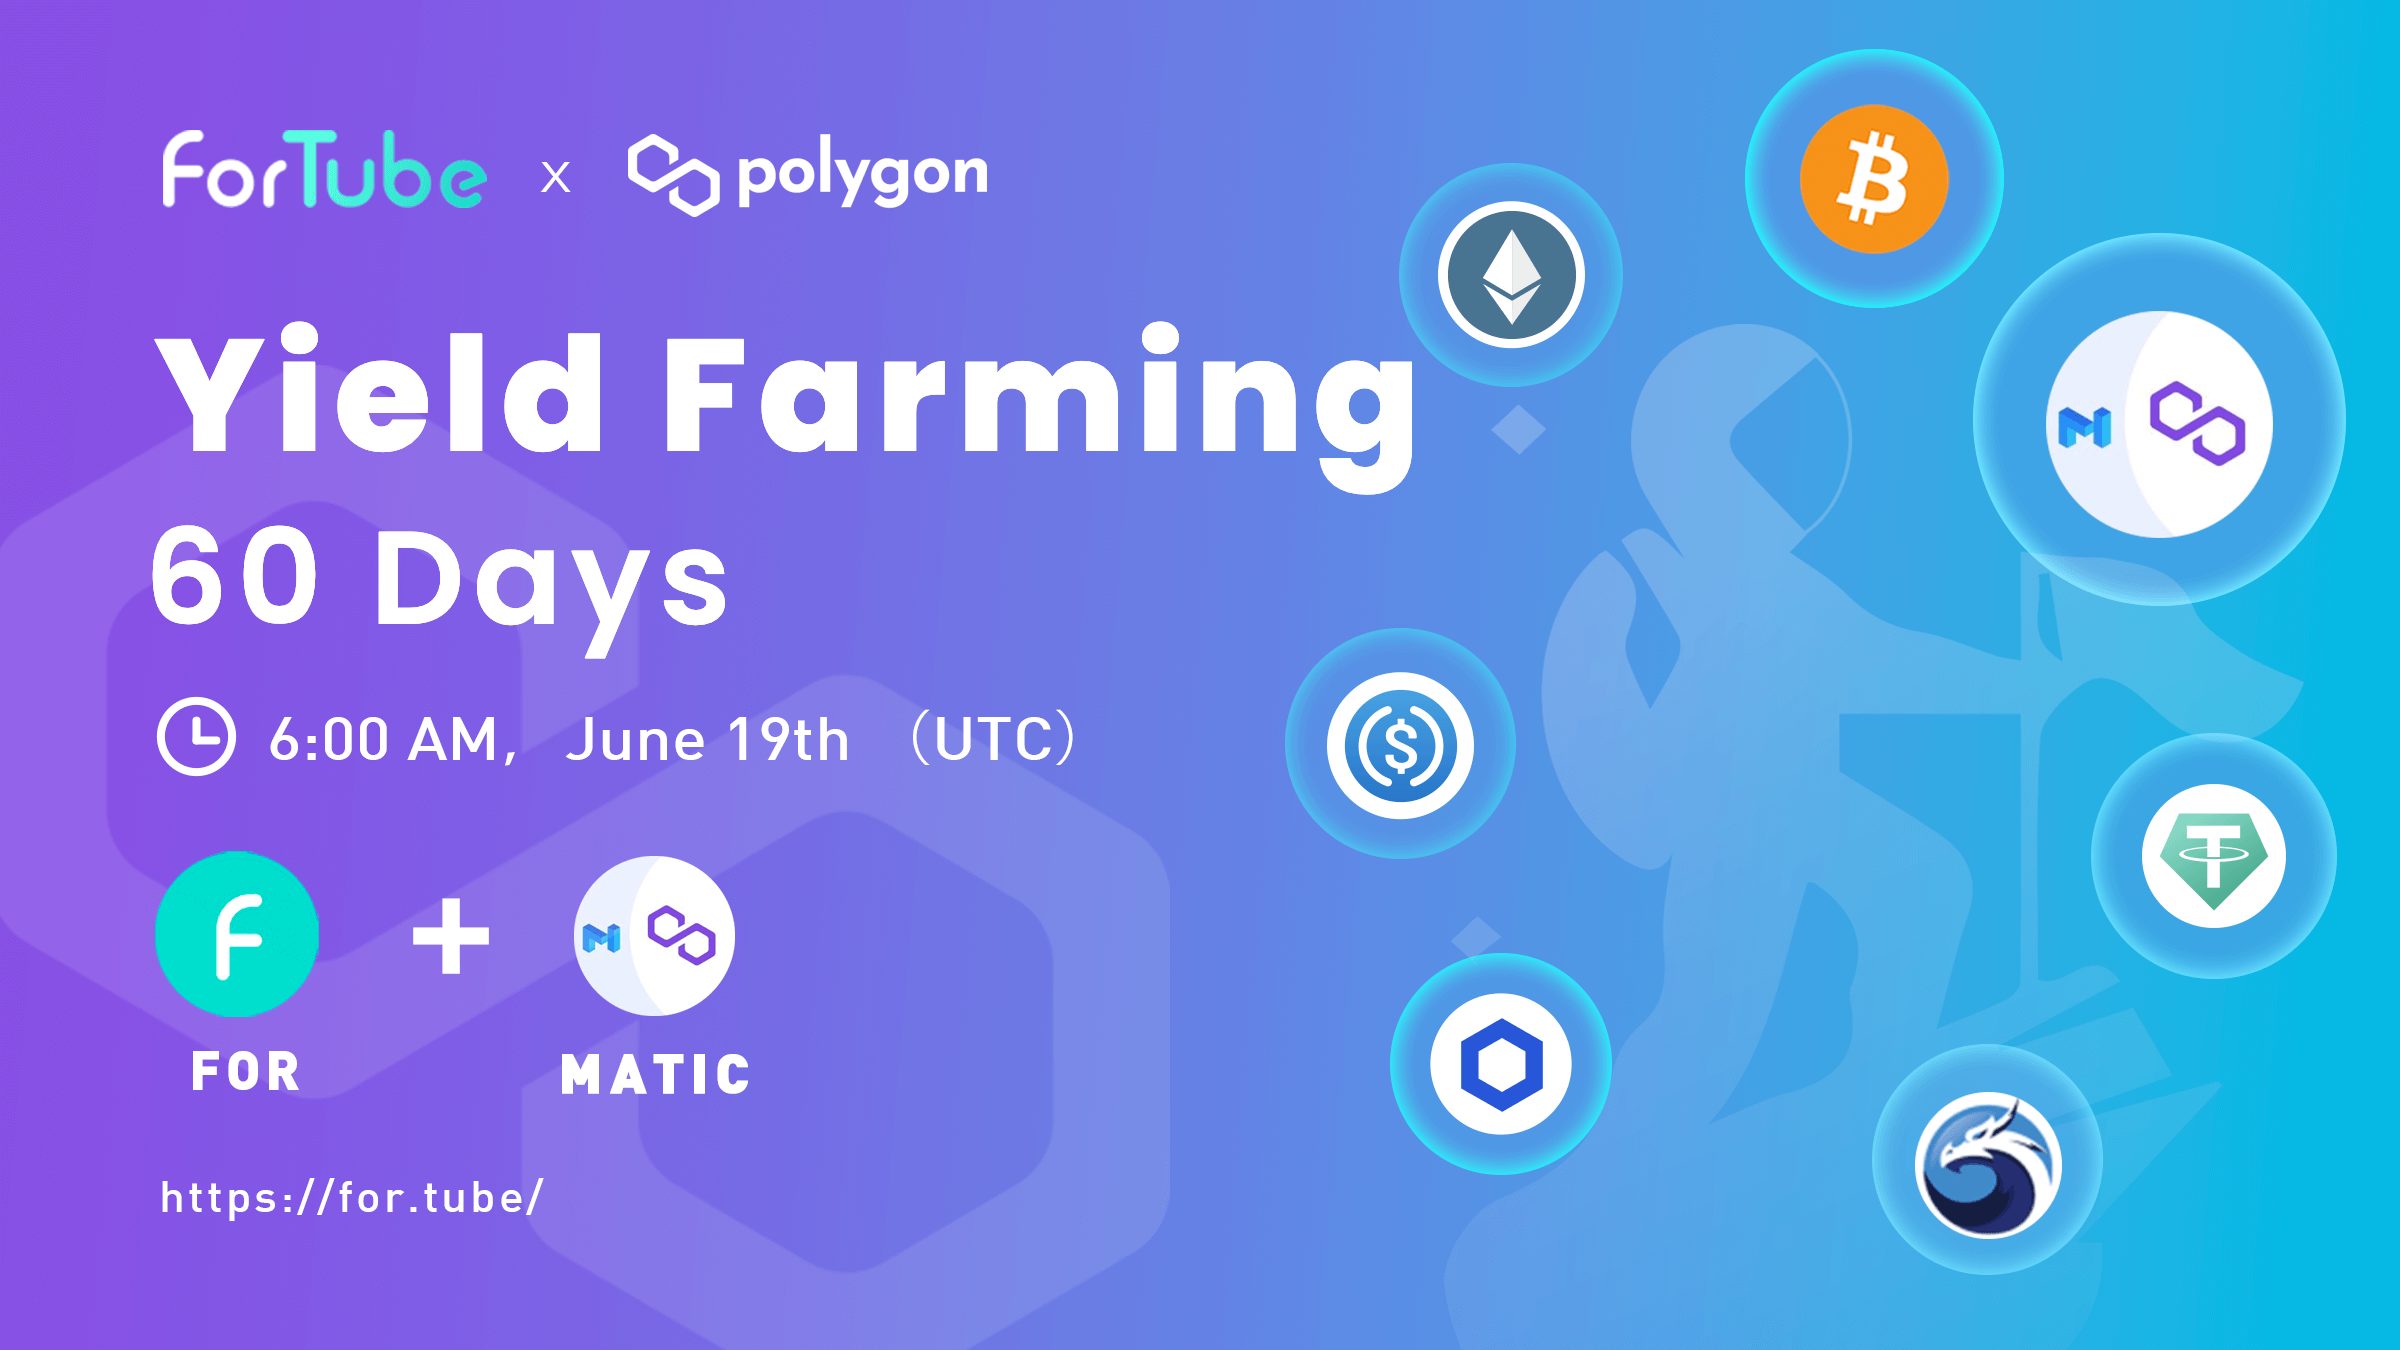 Yield Farming Campaign by ForTube Polygon Version